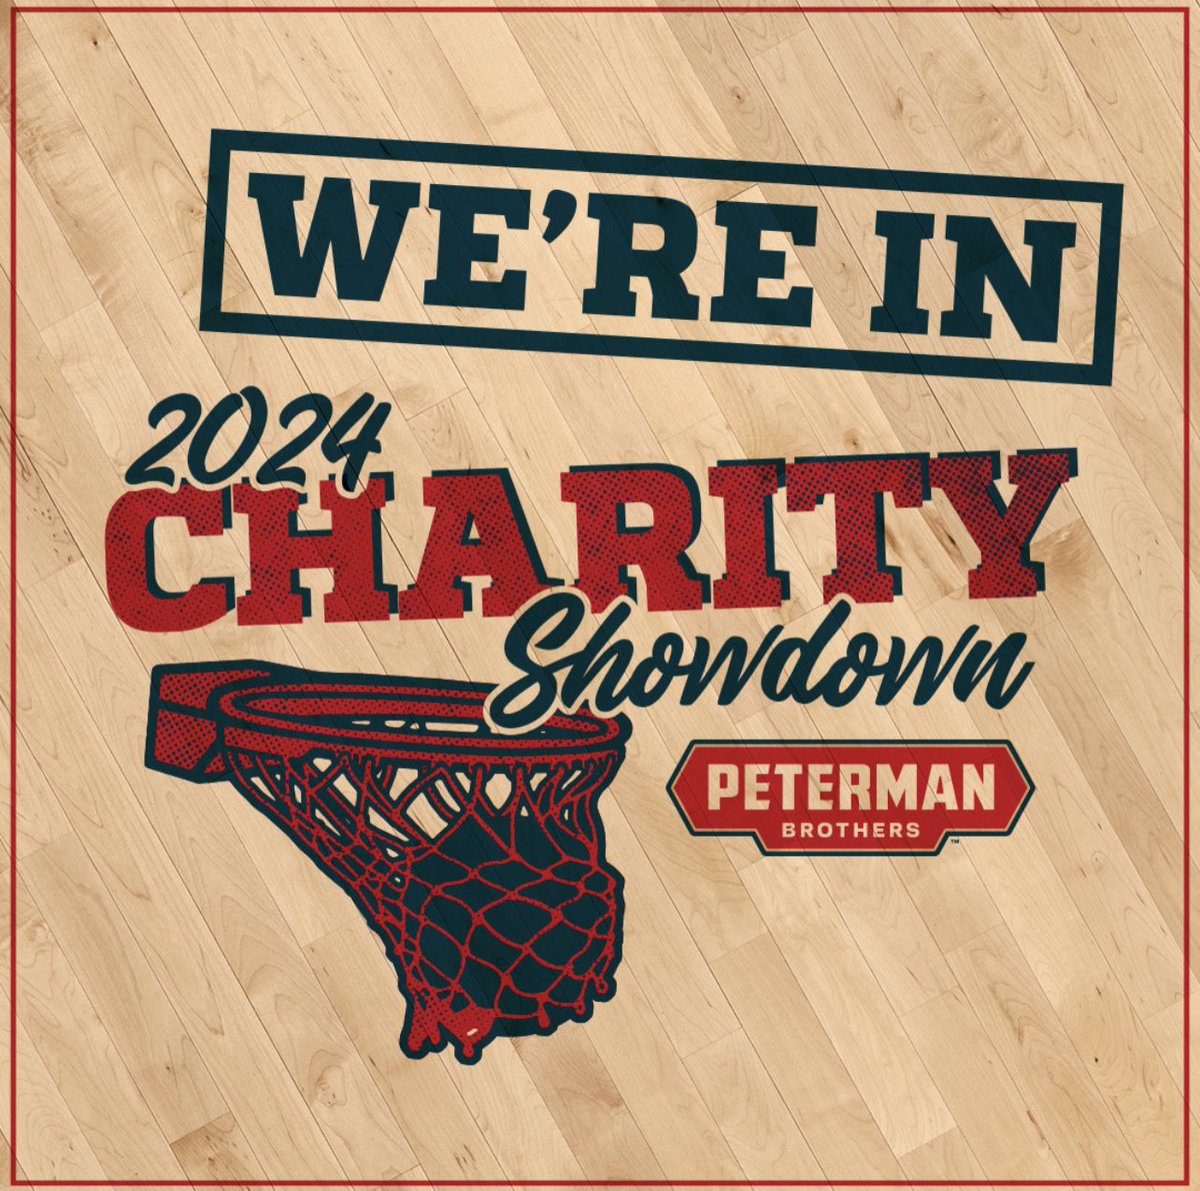 Join me in voting for @IndianaWish in the Peterman Bros Charity Showdown! Click the link below to learn more and help move Indiana Wish into the next round! petermanhcp.com/showdown